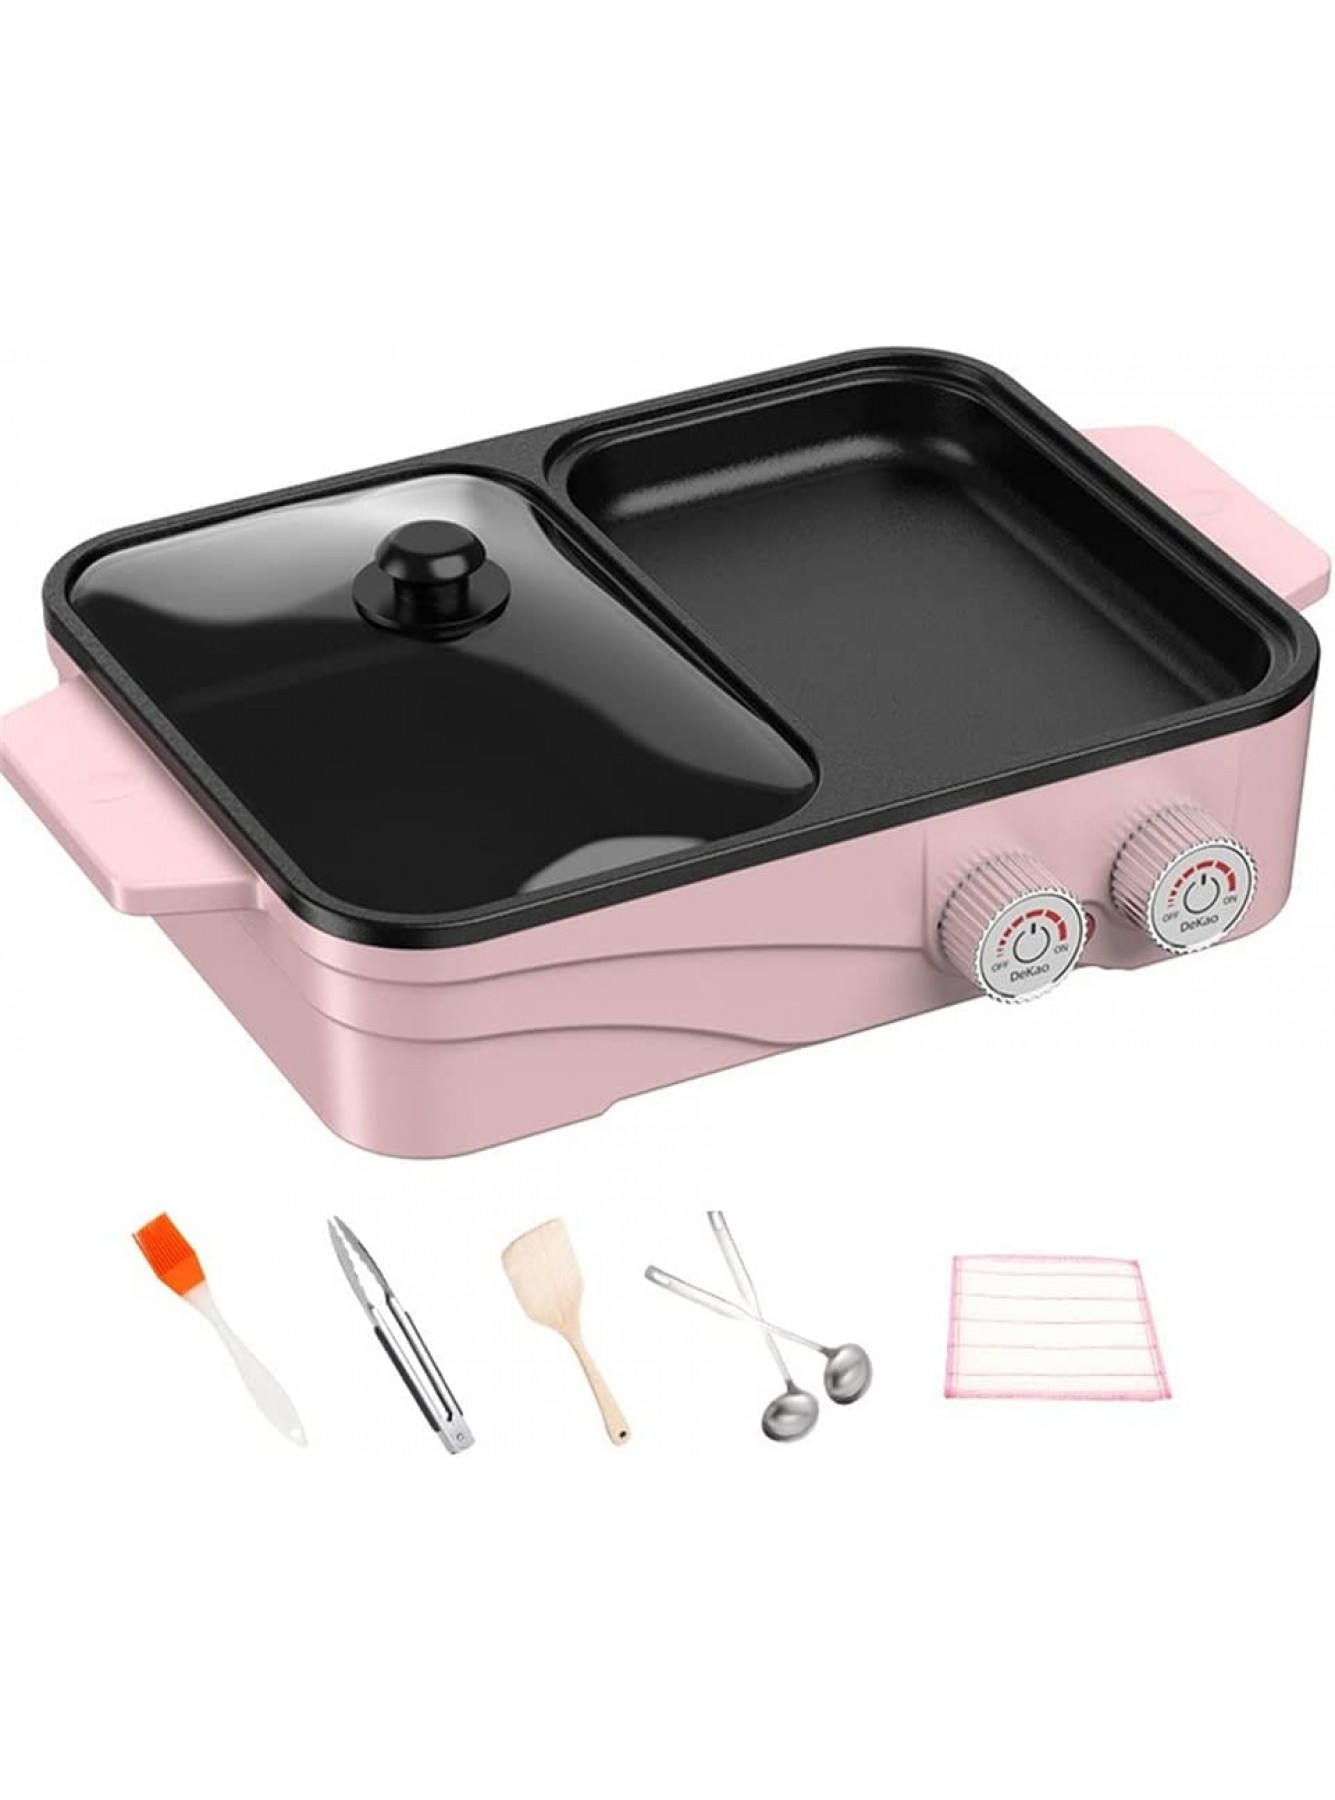 Electric Grill Indoor Hot Pot with Glass Lid & Removable Non-Stick Grill Plate,Separate Dual Temperature Contral for 2-8 People Family Gathering Friend Meeting Party pink B09WMBBLB8